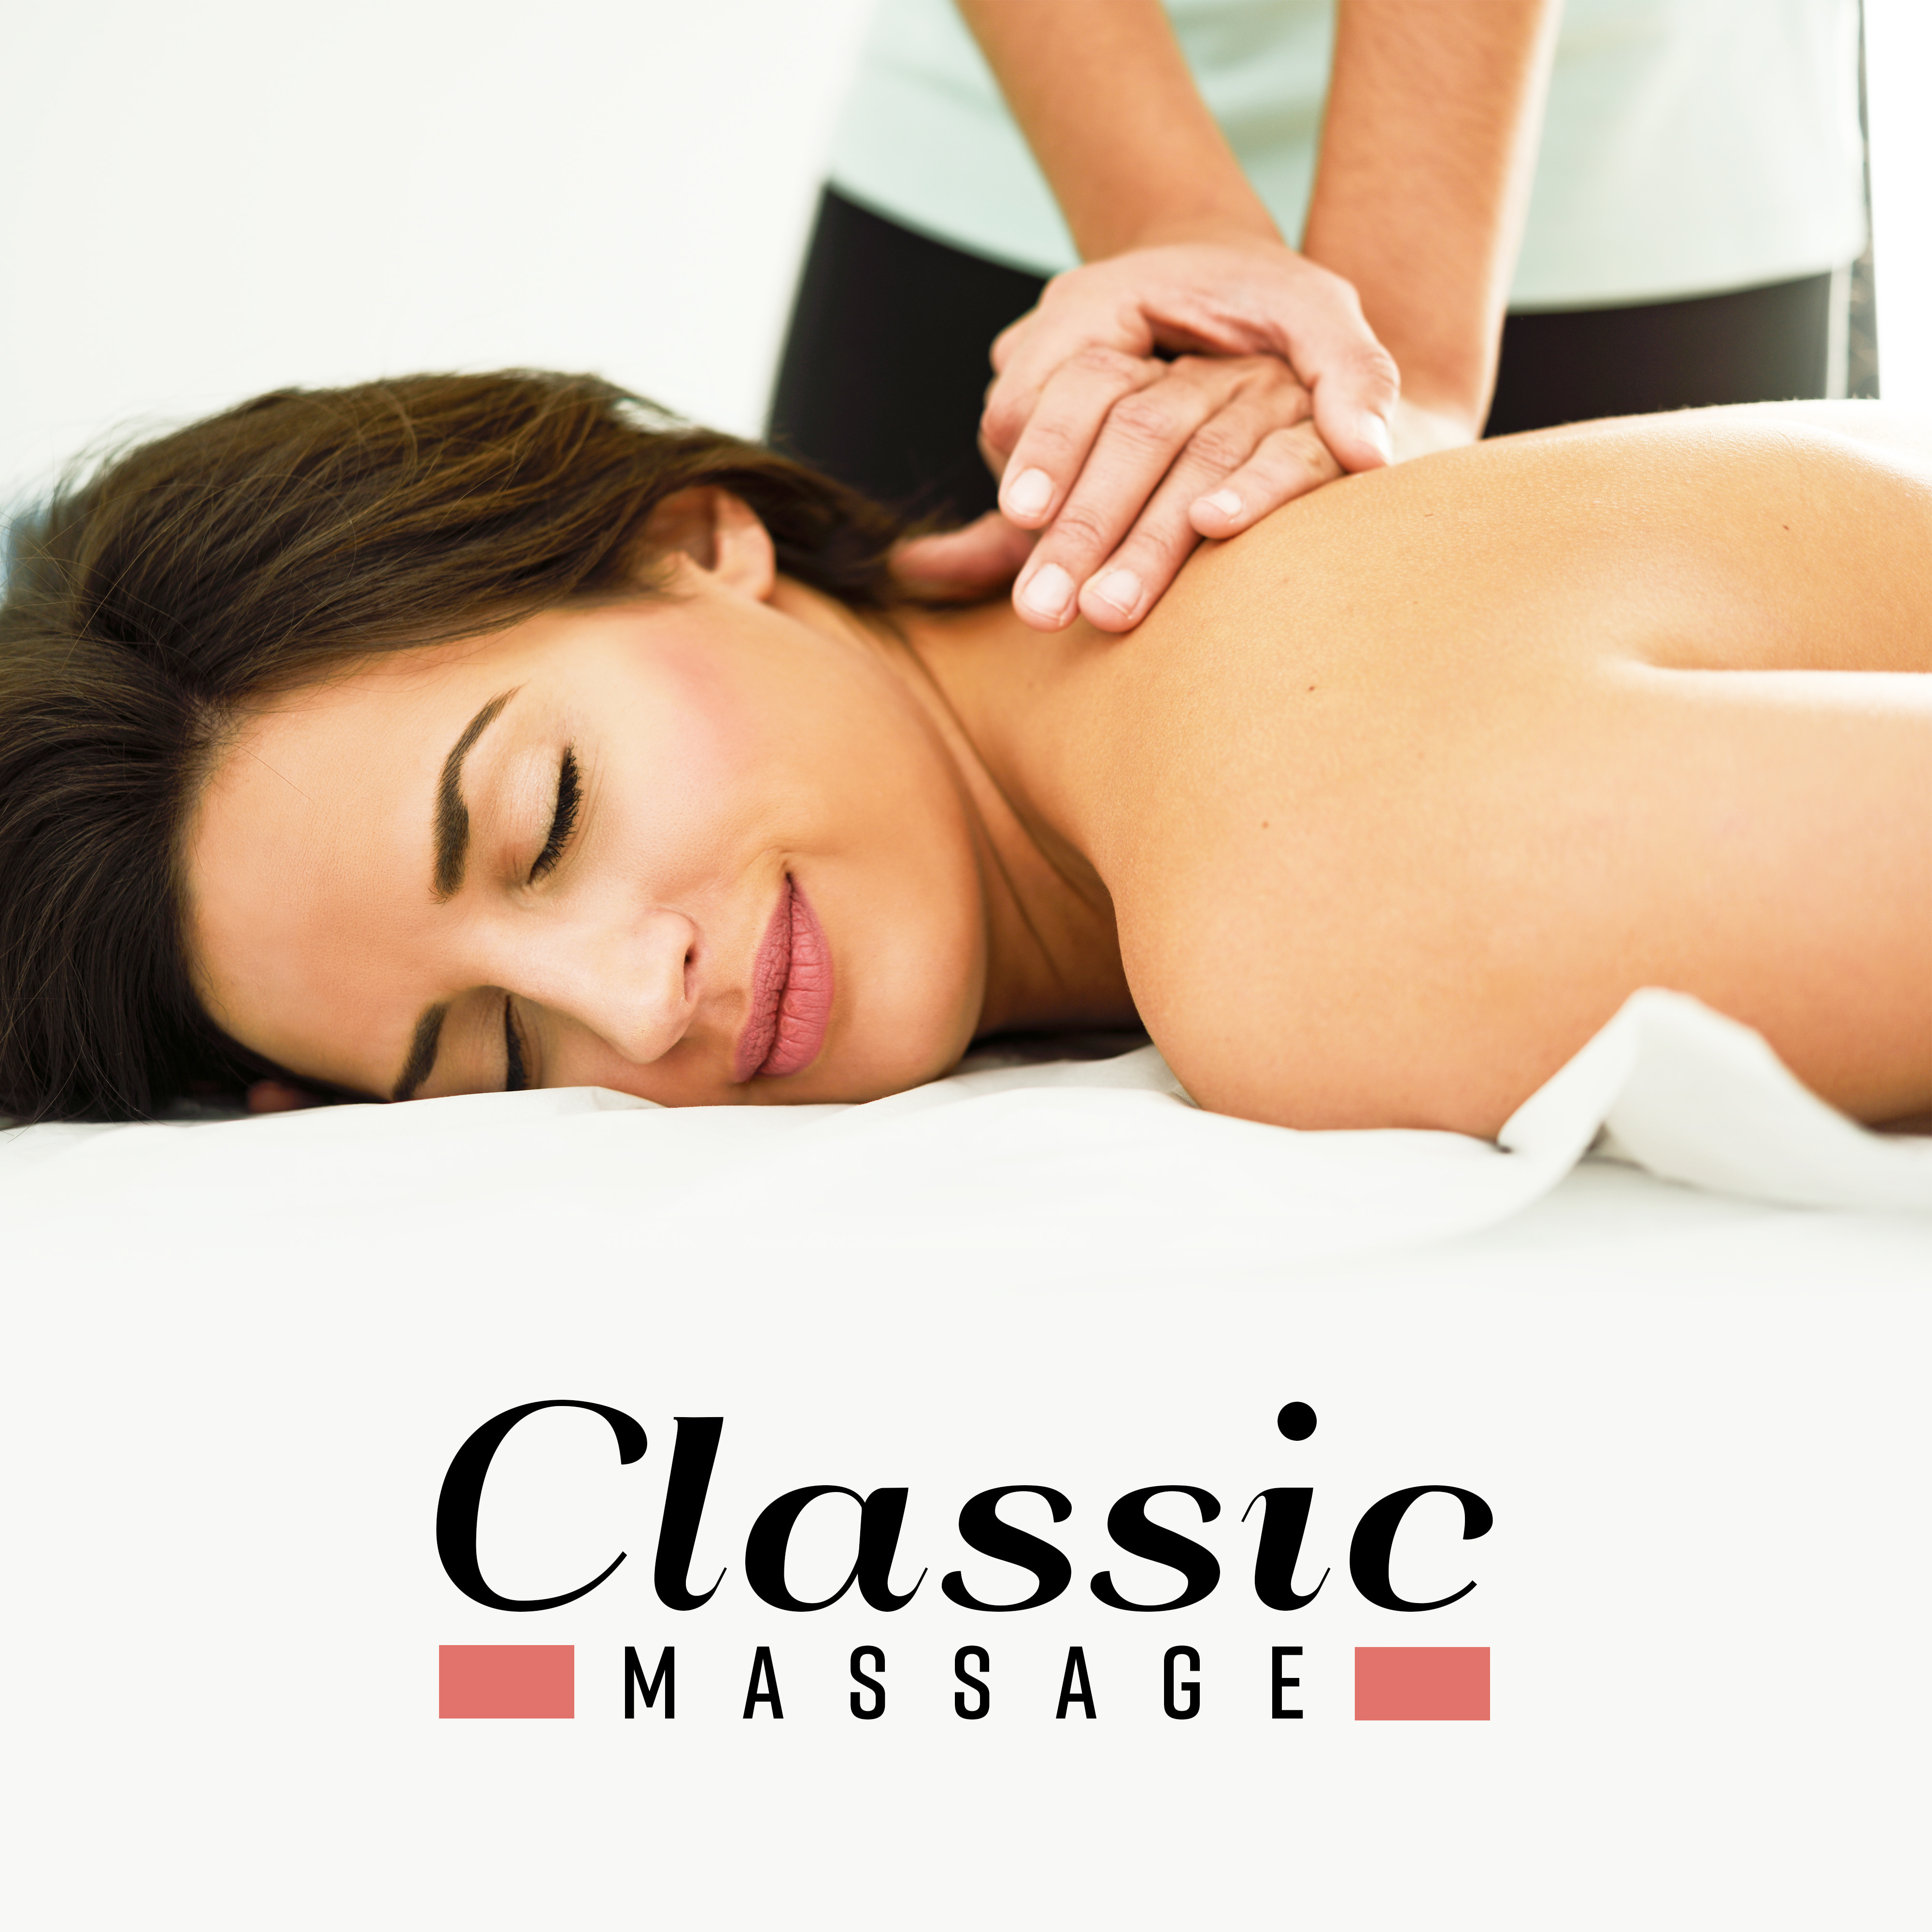 Classic Massage: Quiet and Calm Background Melodies for Even More Pleasure and Relaxation